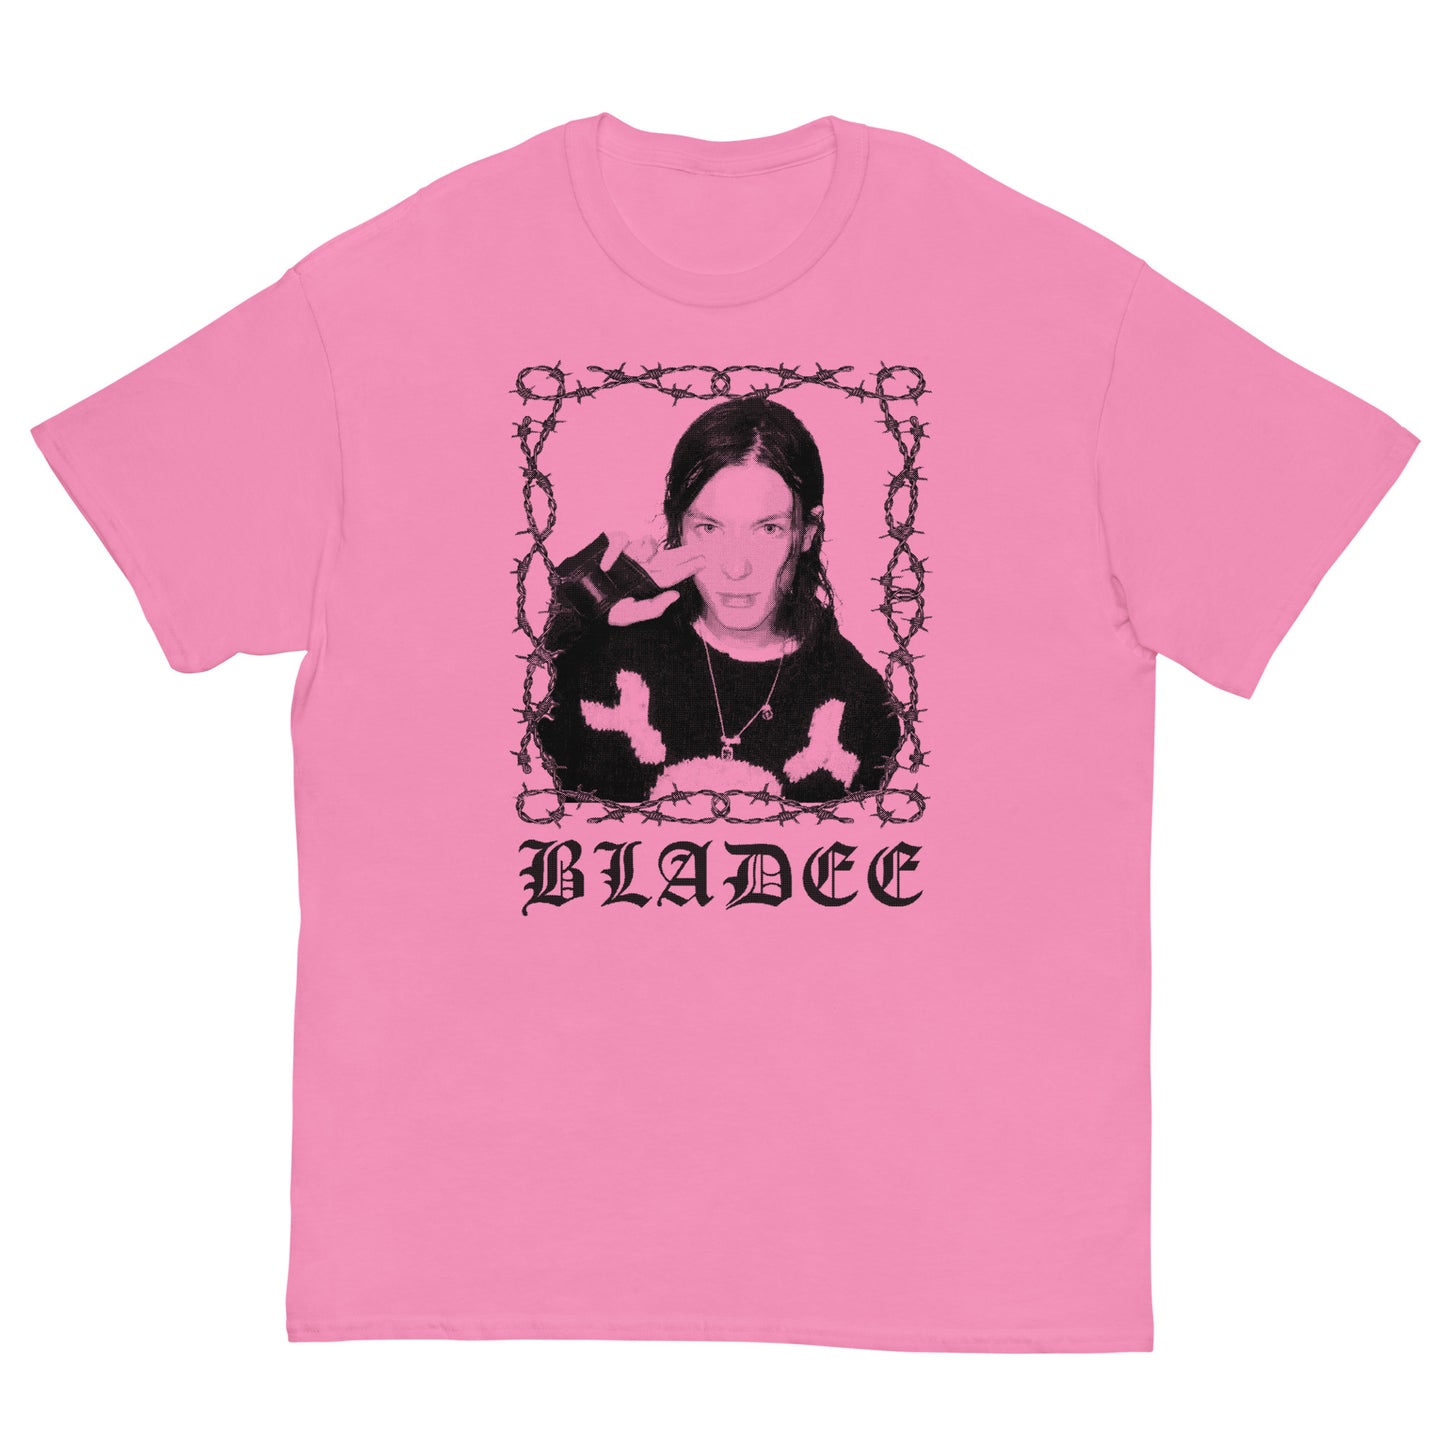 Bared Bladee T-Shirt by Under Heaven